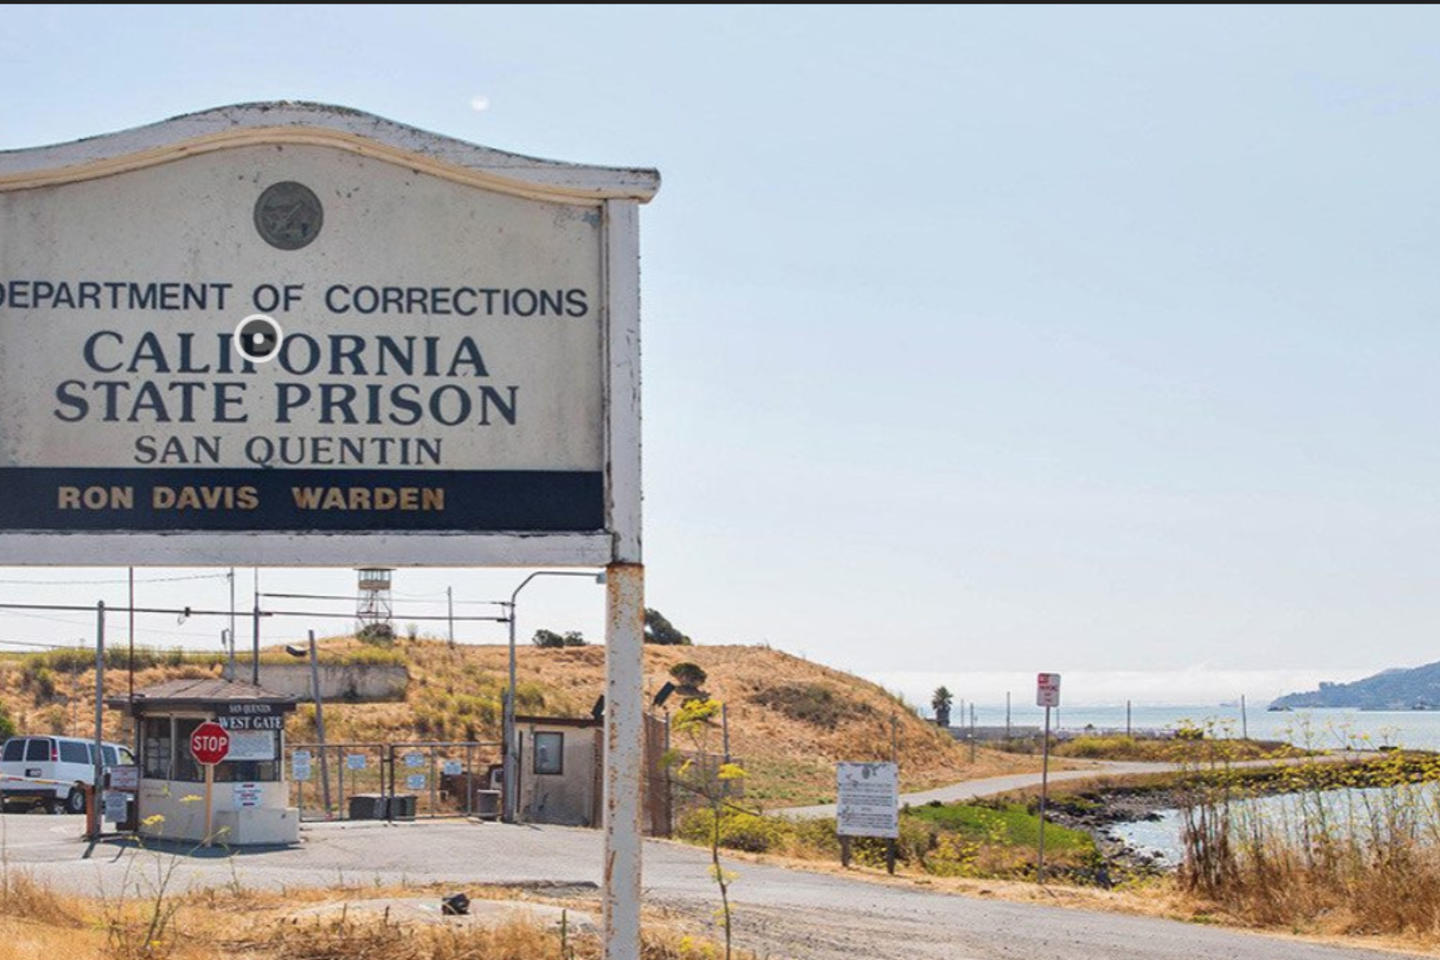 A sign for the San Quentin California State Prison sign